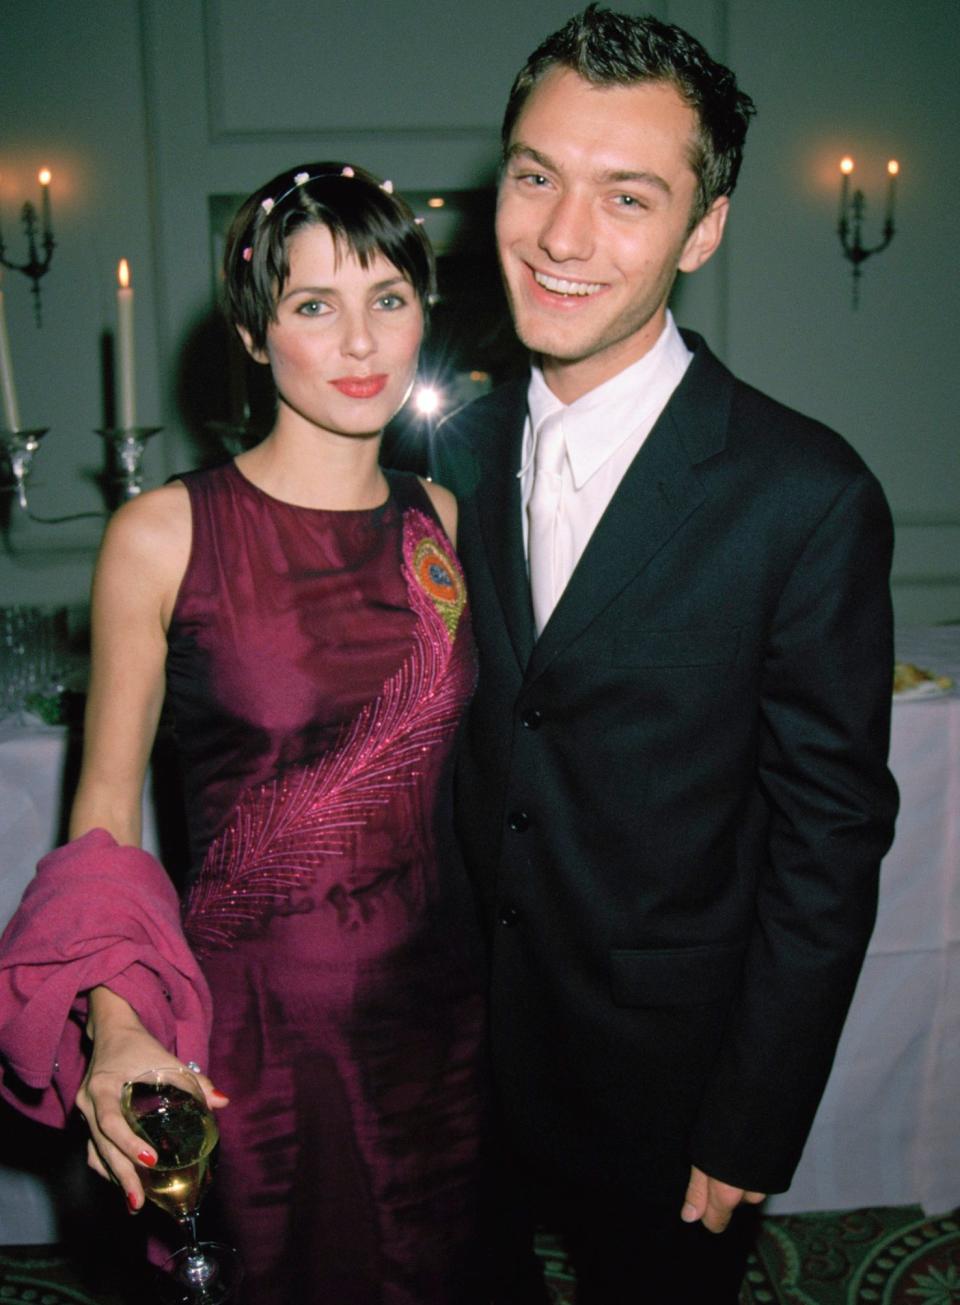 Frost with her ex husband Jude Law in 1998